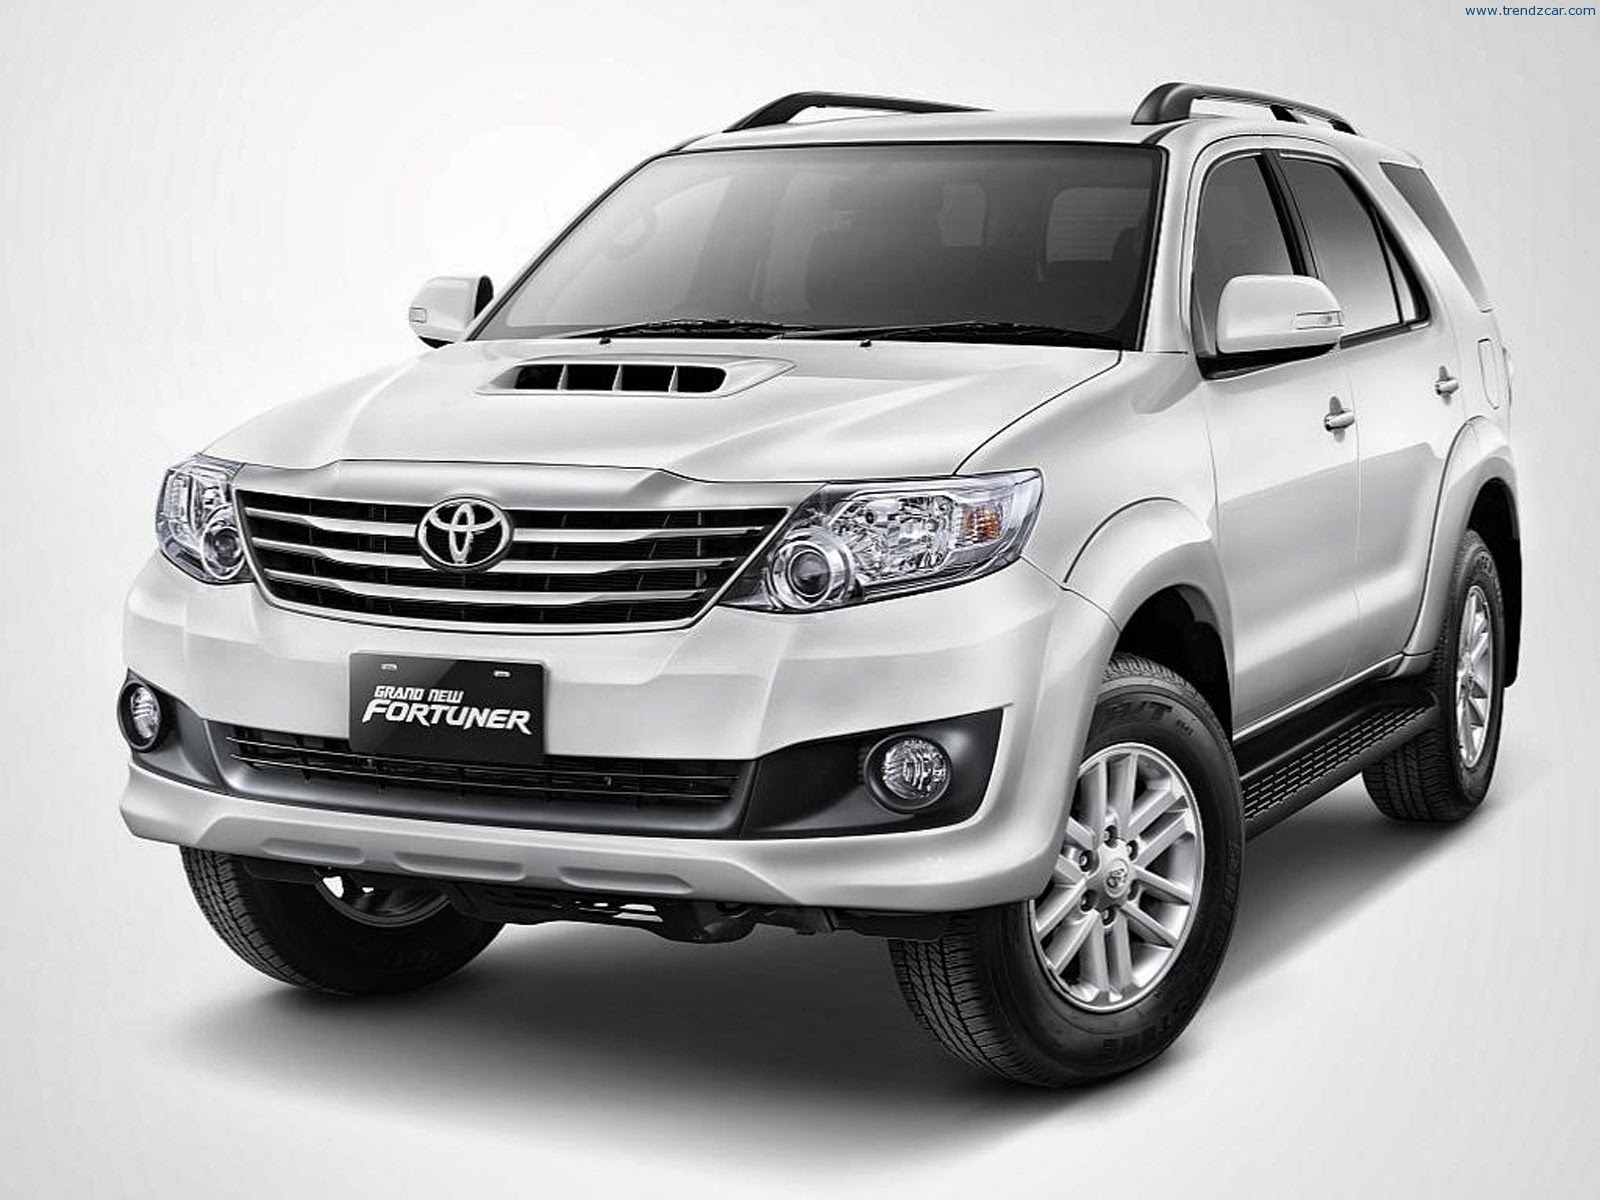 Top Ten SUV Cars in India - New SUVs in India, Best SUV Cars 2014